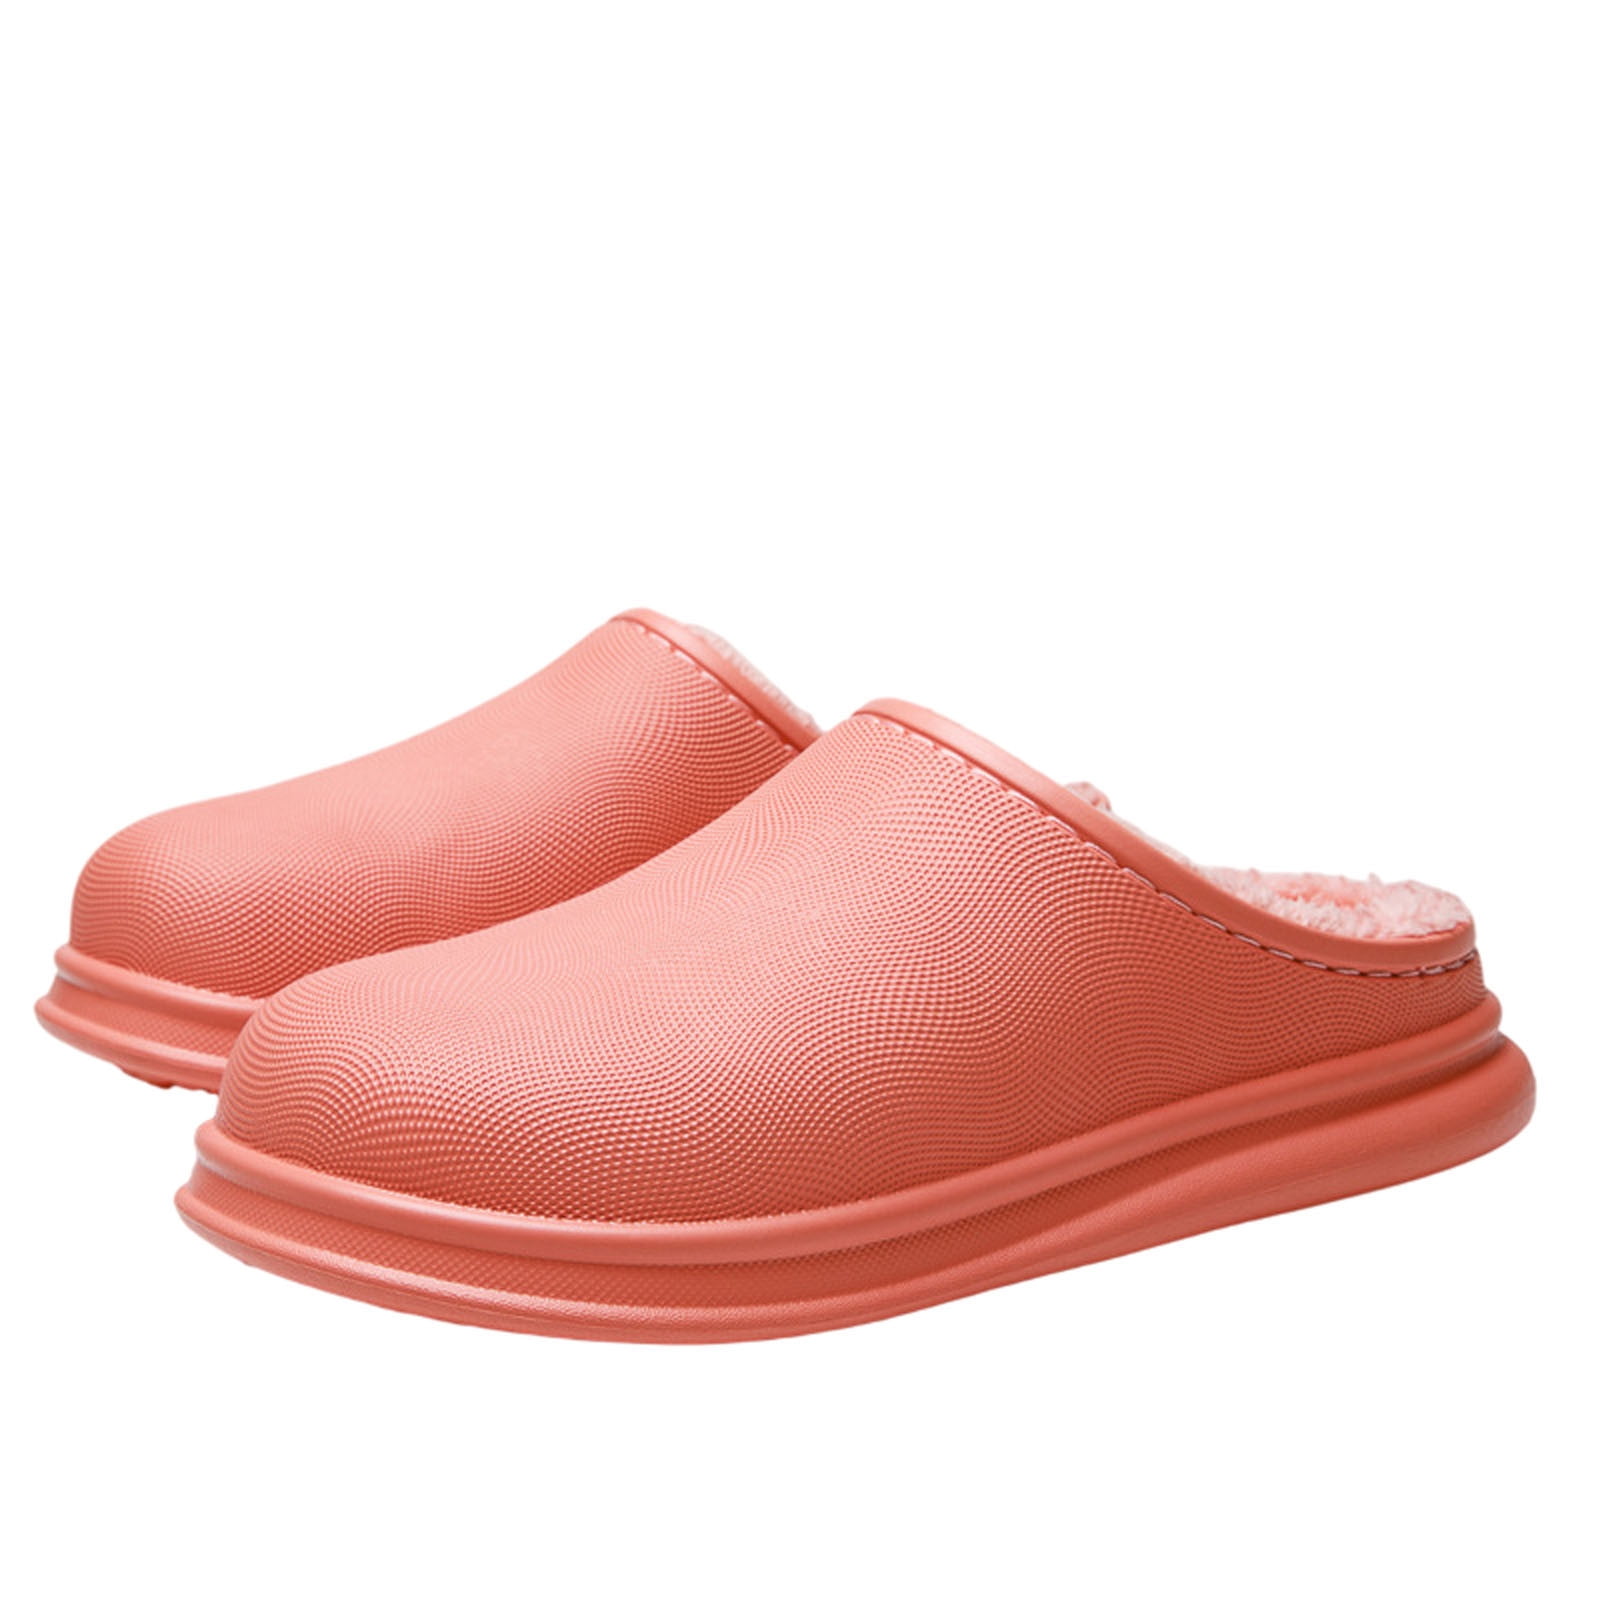 Bnwani Shoes Snadals and Slippers for Women Waterproof Cotton Slippers ...